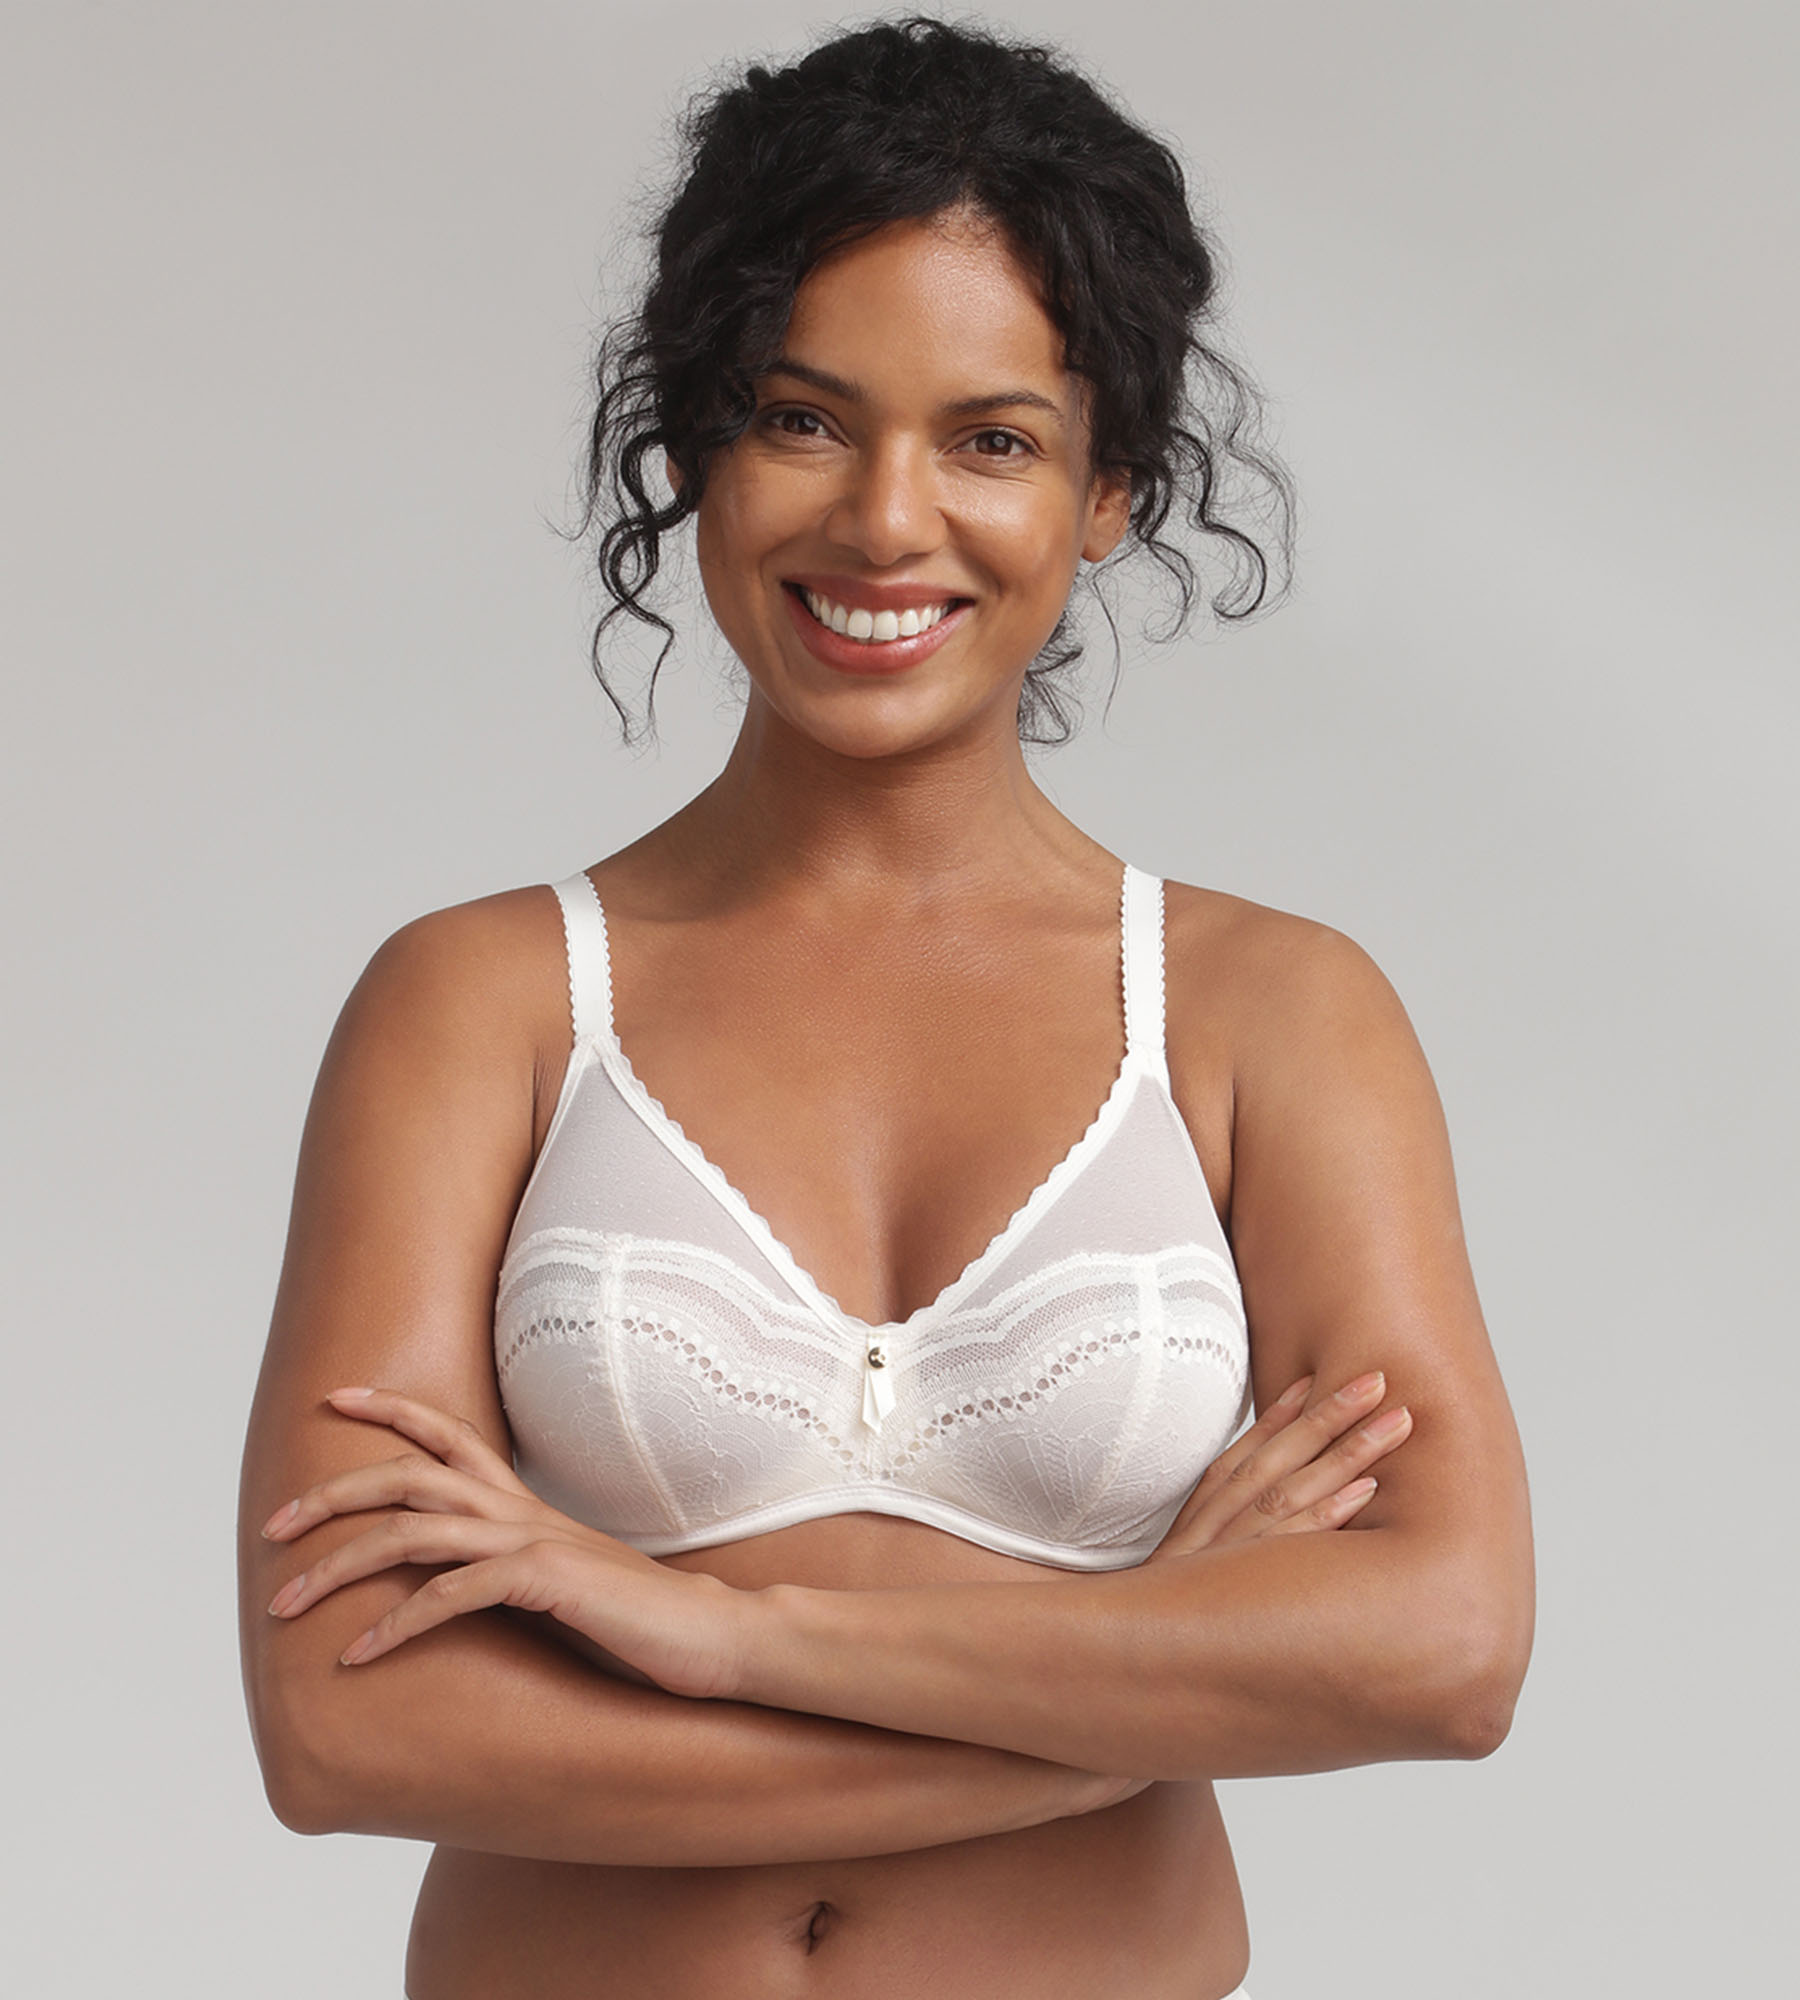 Just My Size Women's Comfort Lace Hidden Shapers Bra, White